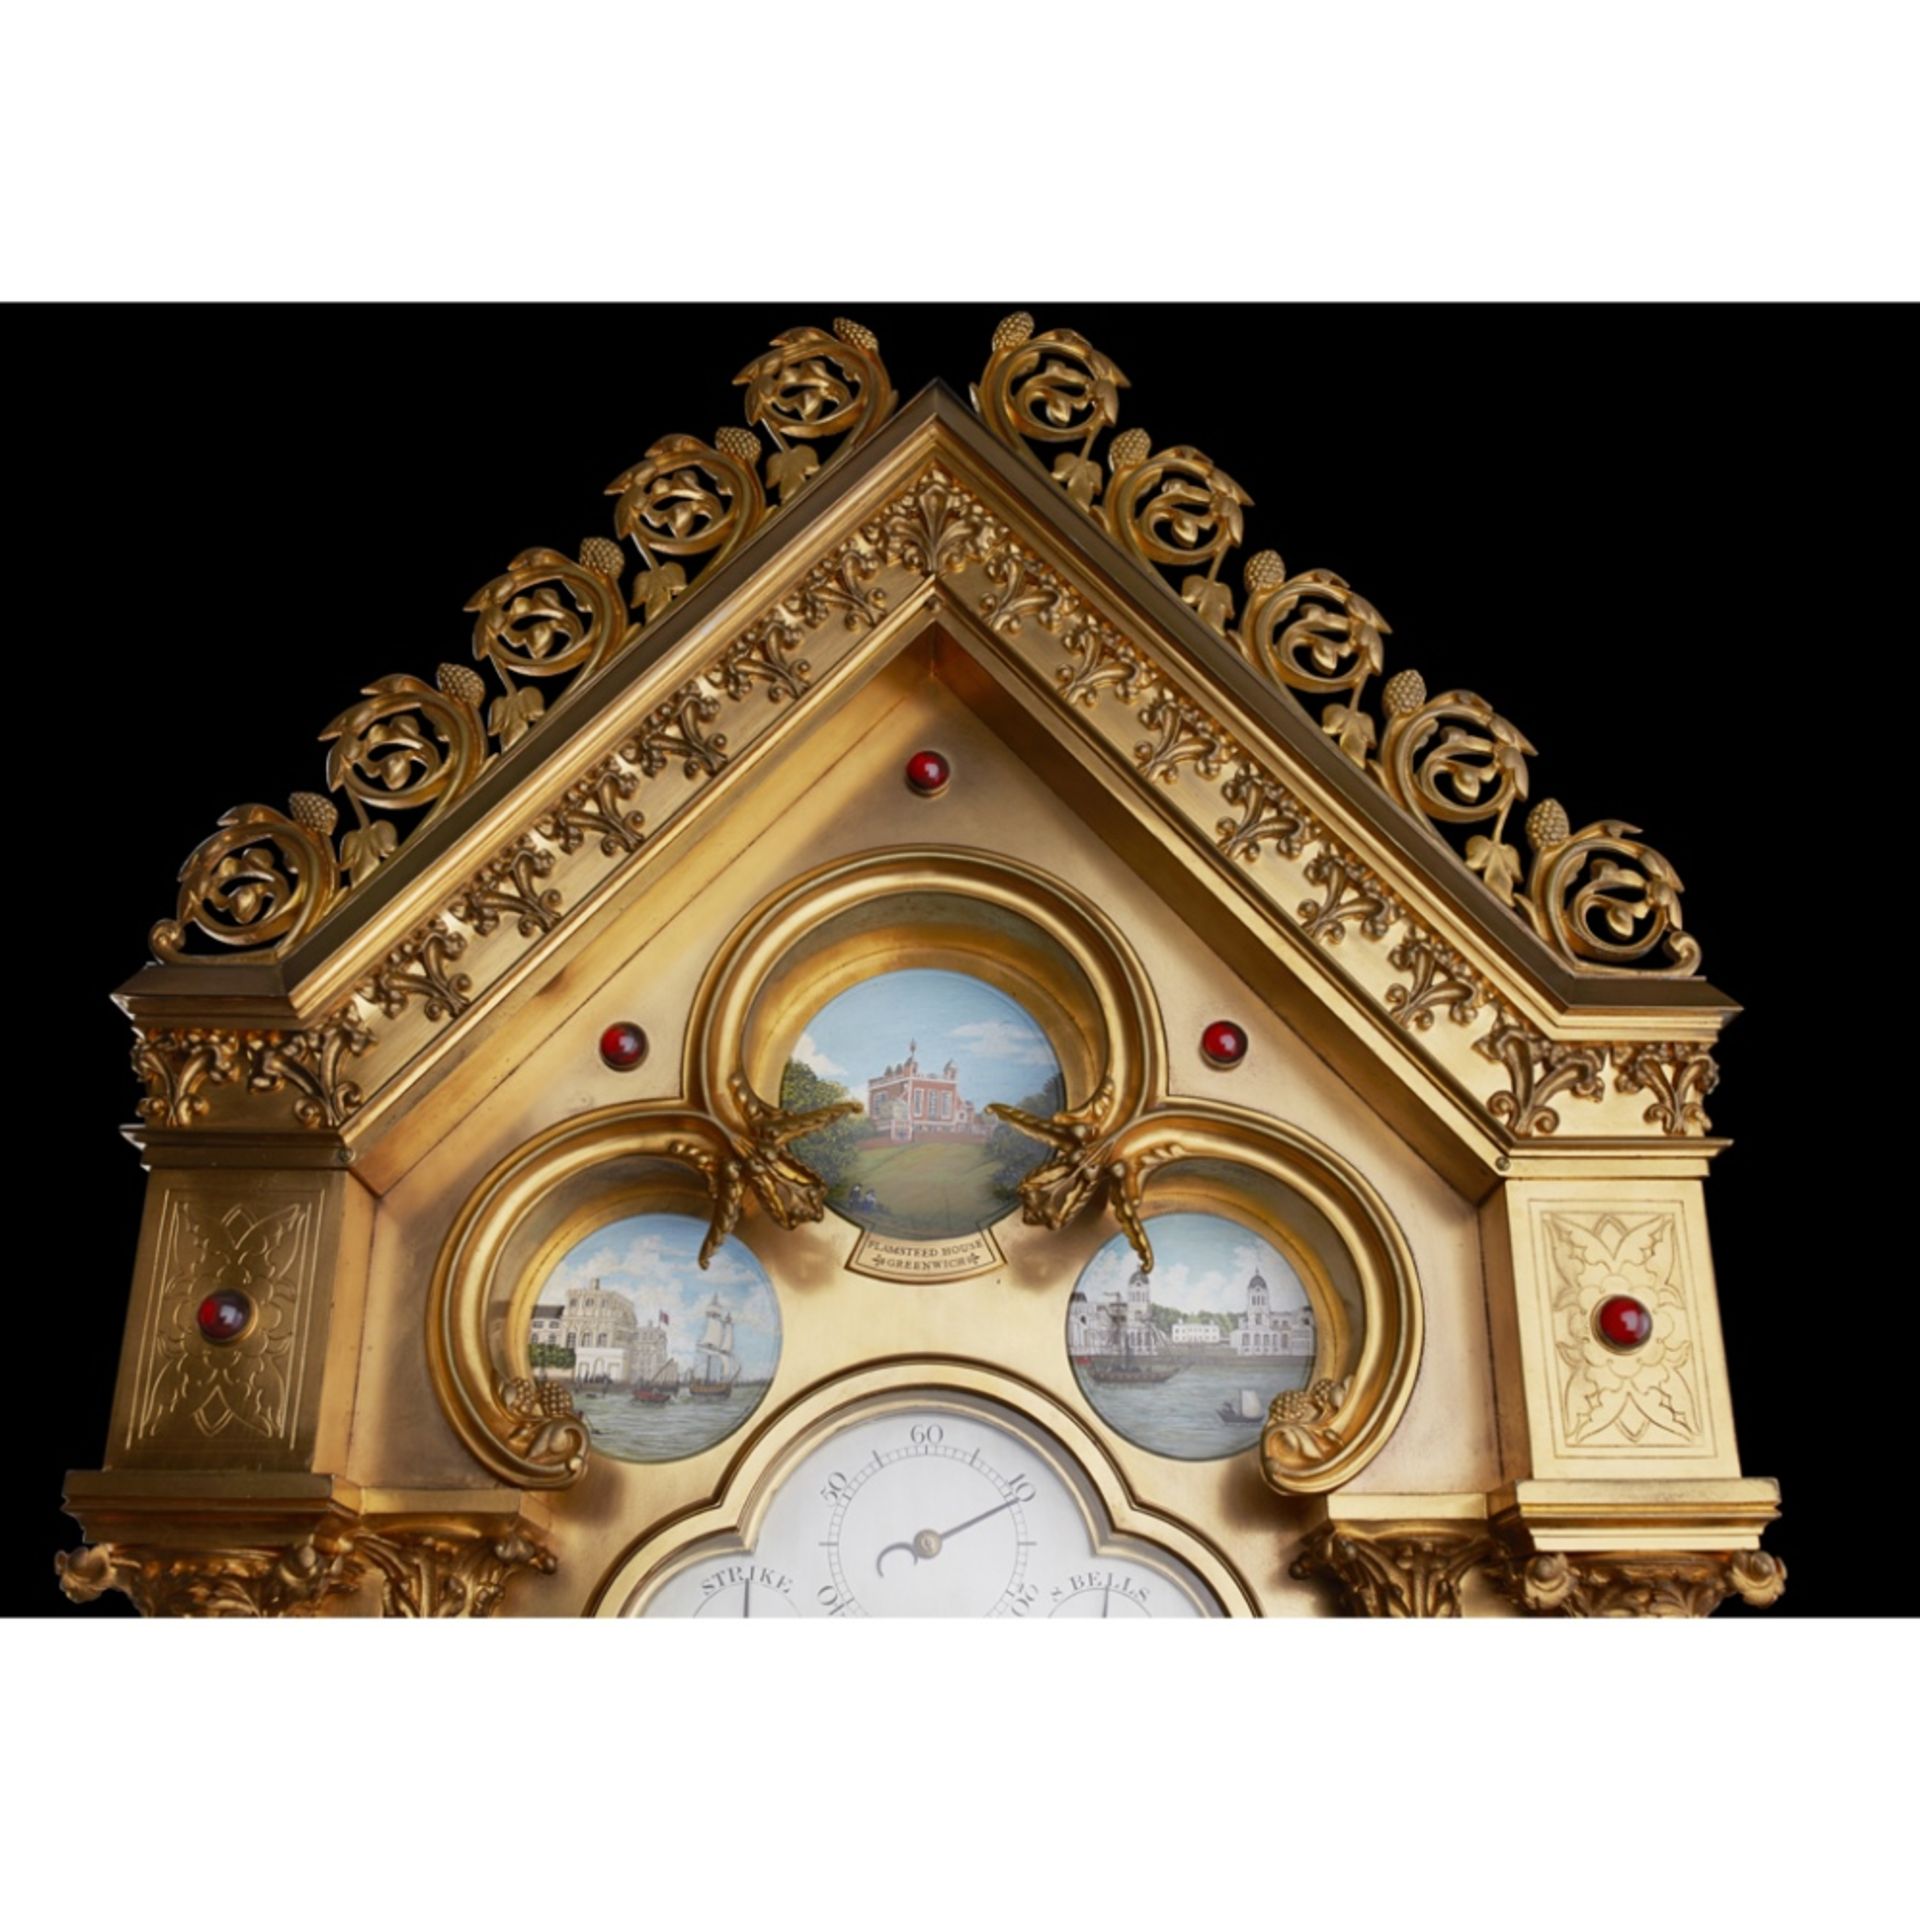 LARGE AND IMPRESSIVE GOTHIC REVIVAL CHIMING CLOCK BY BENJAMIN LEWIS VULLIAMY, LONDONCIRCA 1840 the - Image 10 of 13